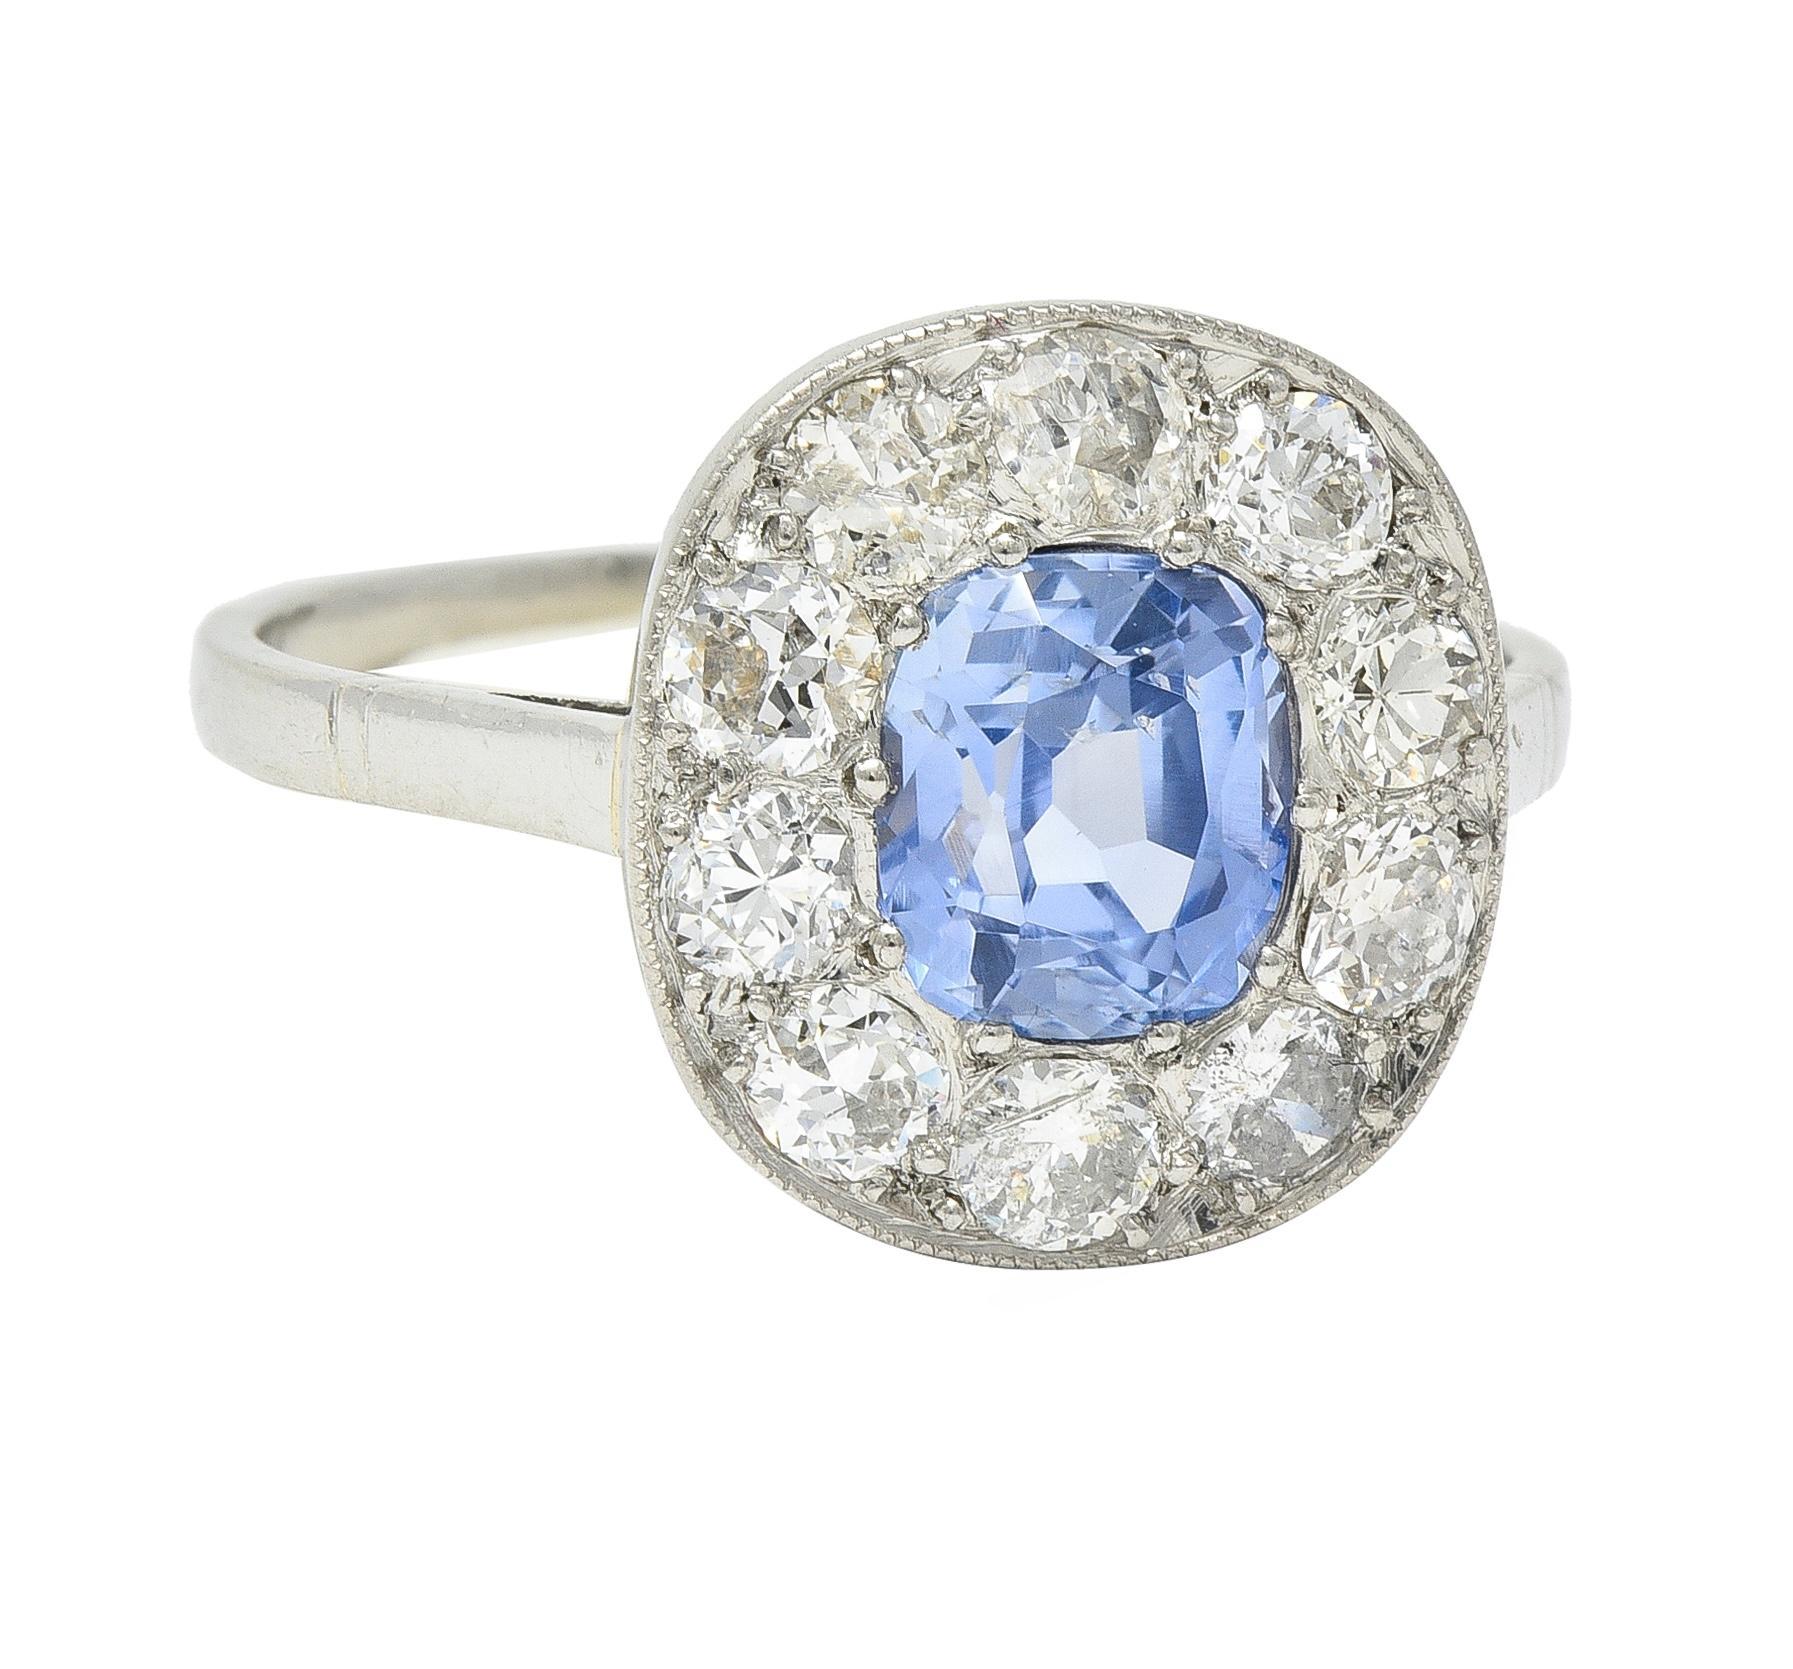 Centering a cushion cut sapphire weighing 1.33 carats - transparent light cornflower blue 
Natural Sri Lankan in origin with no indications of heat treatment - bead set 
Featuring a halo surround of old European and transitional cut diamonds